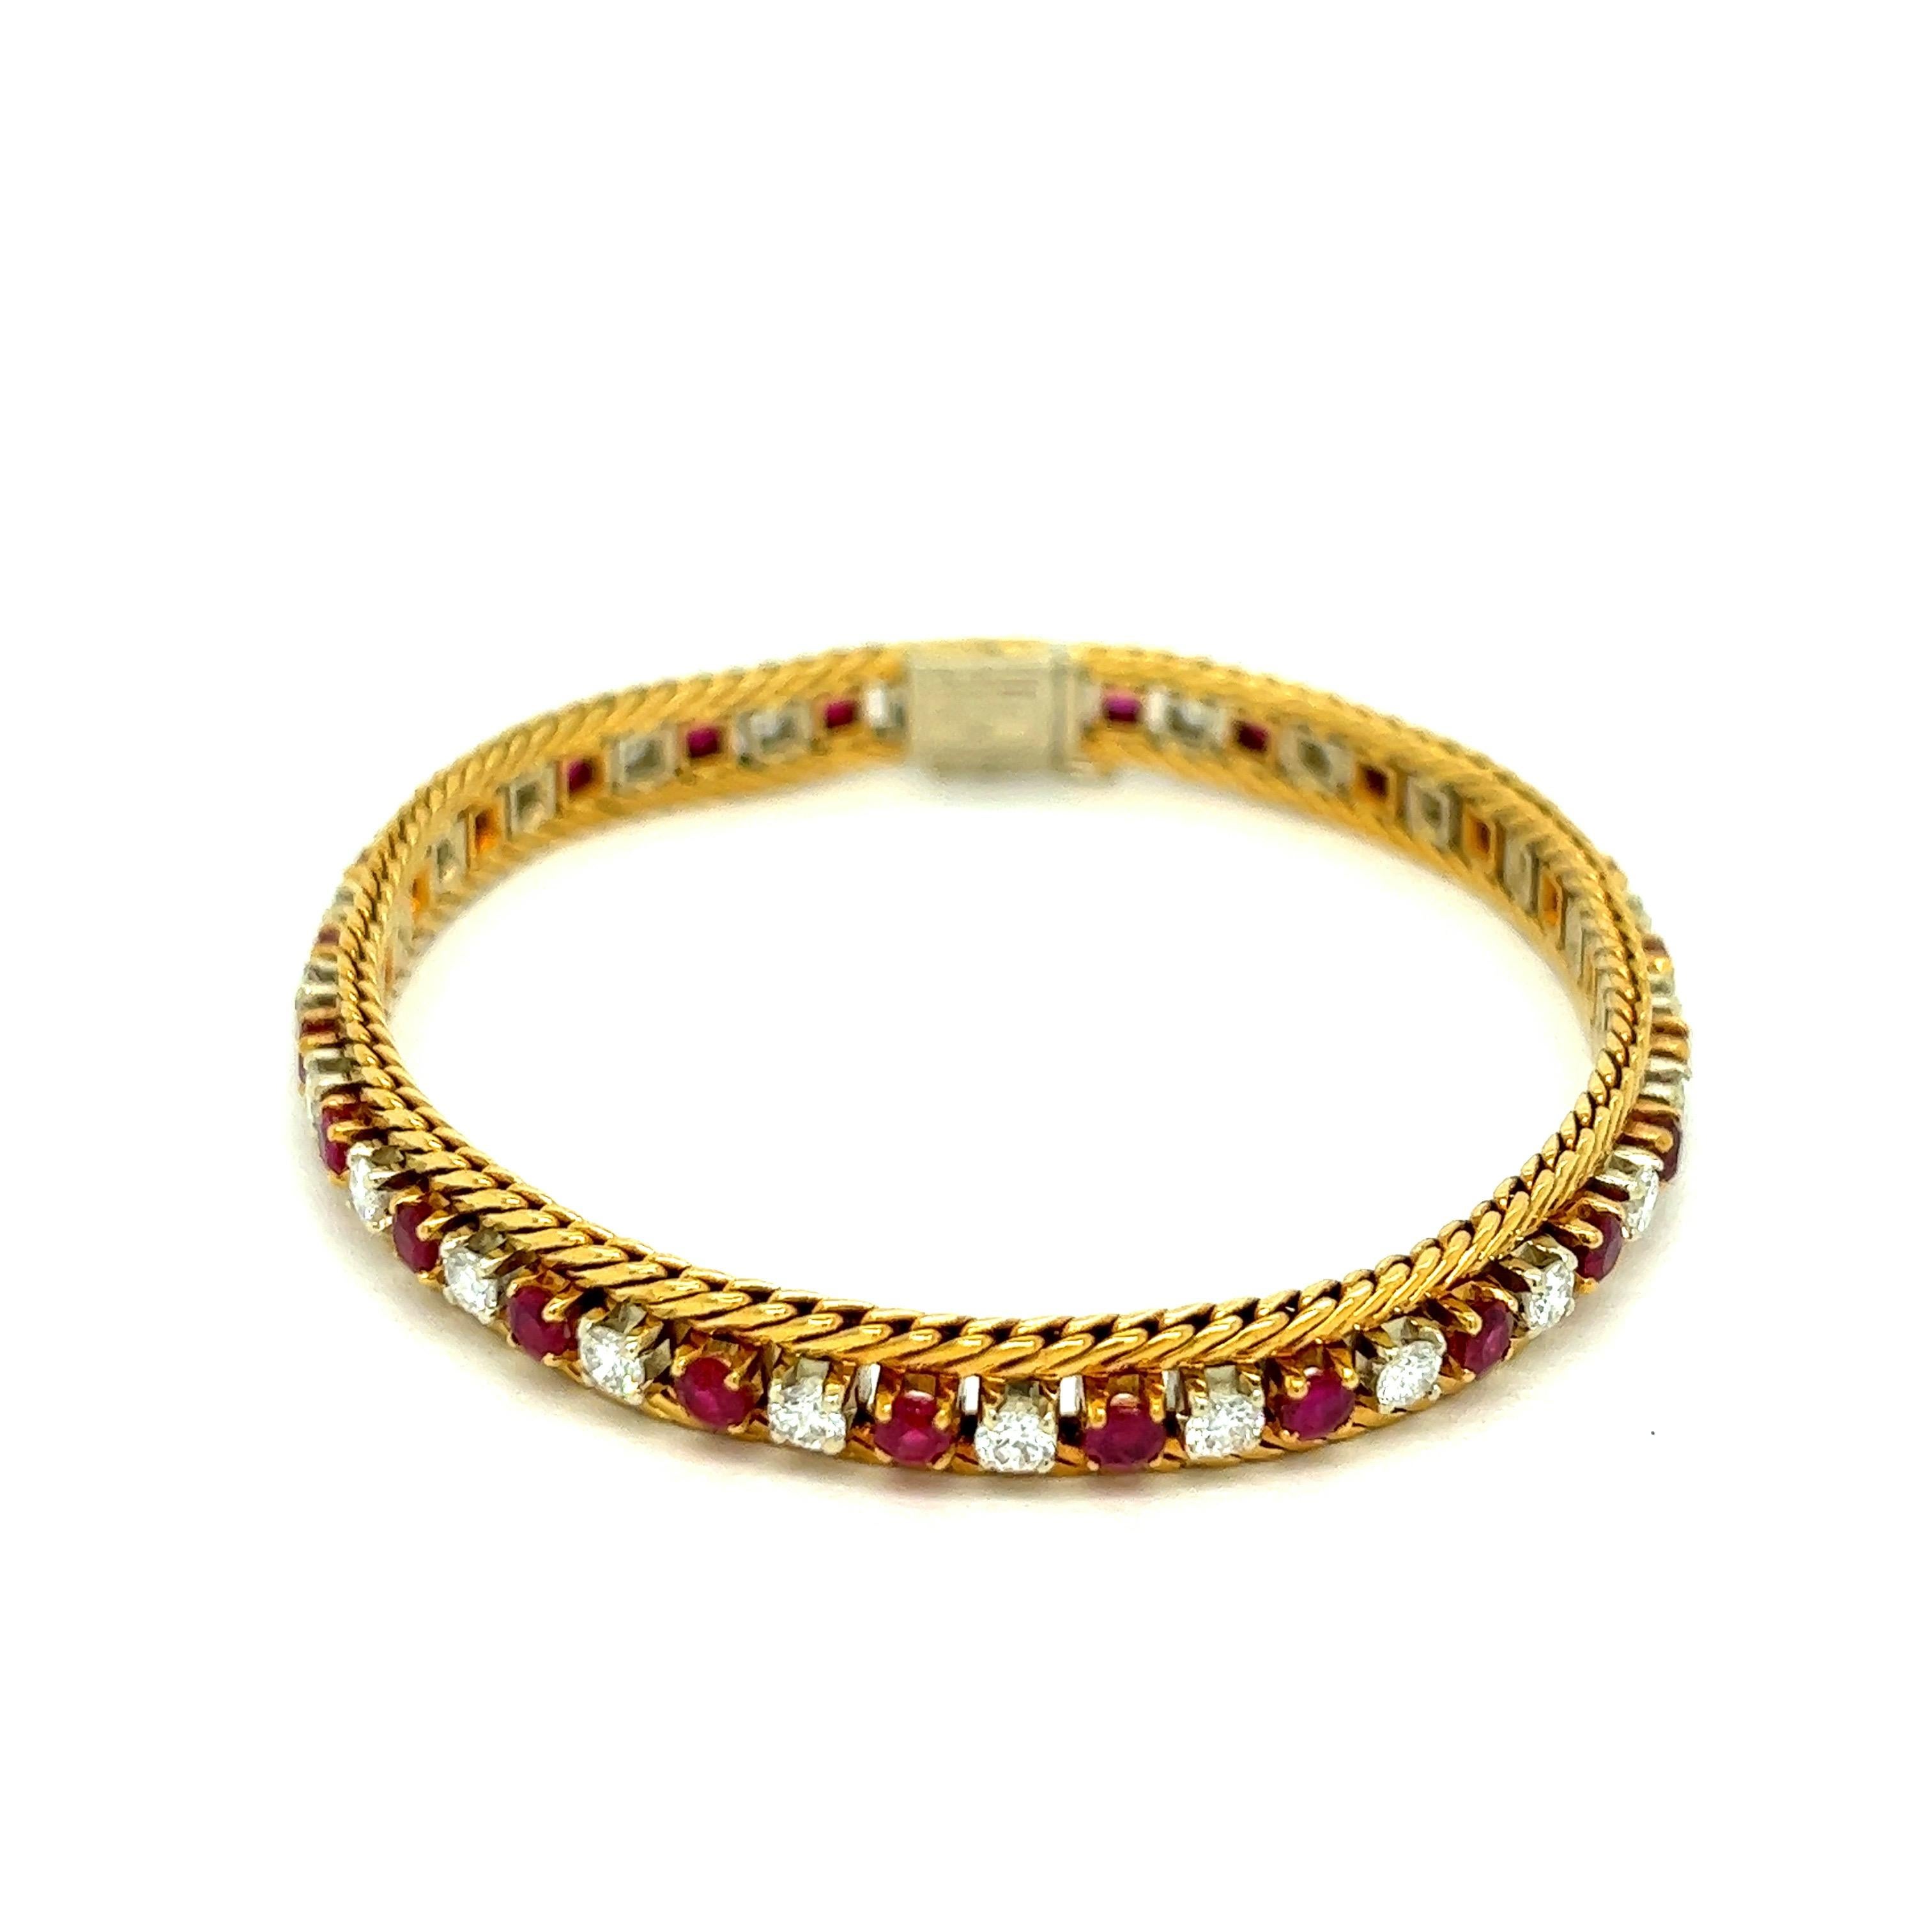 Cartier diamond and ruby line bracelet, made in Italy

Round-cut diamonds weighing approximately 2.95 carats, alternating with round-cut rubies weighing approximately 2.85 carats, 18 karat yellow gold; marked Cartier, 54754, made in Italy,